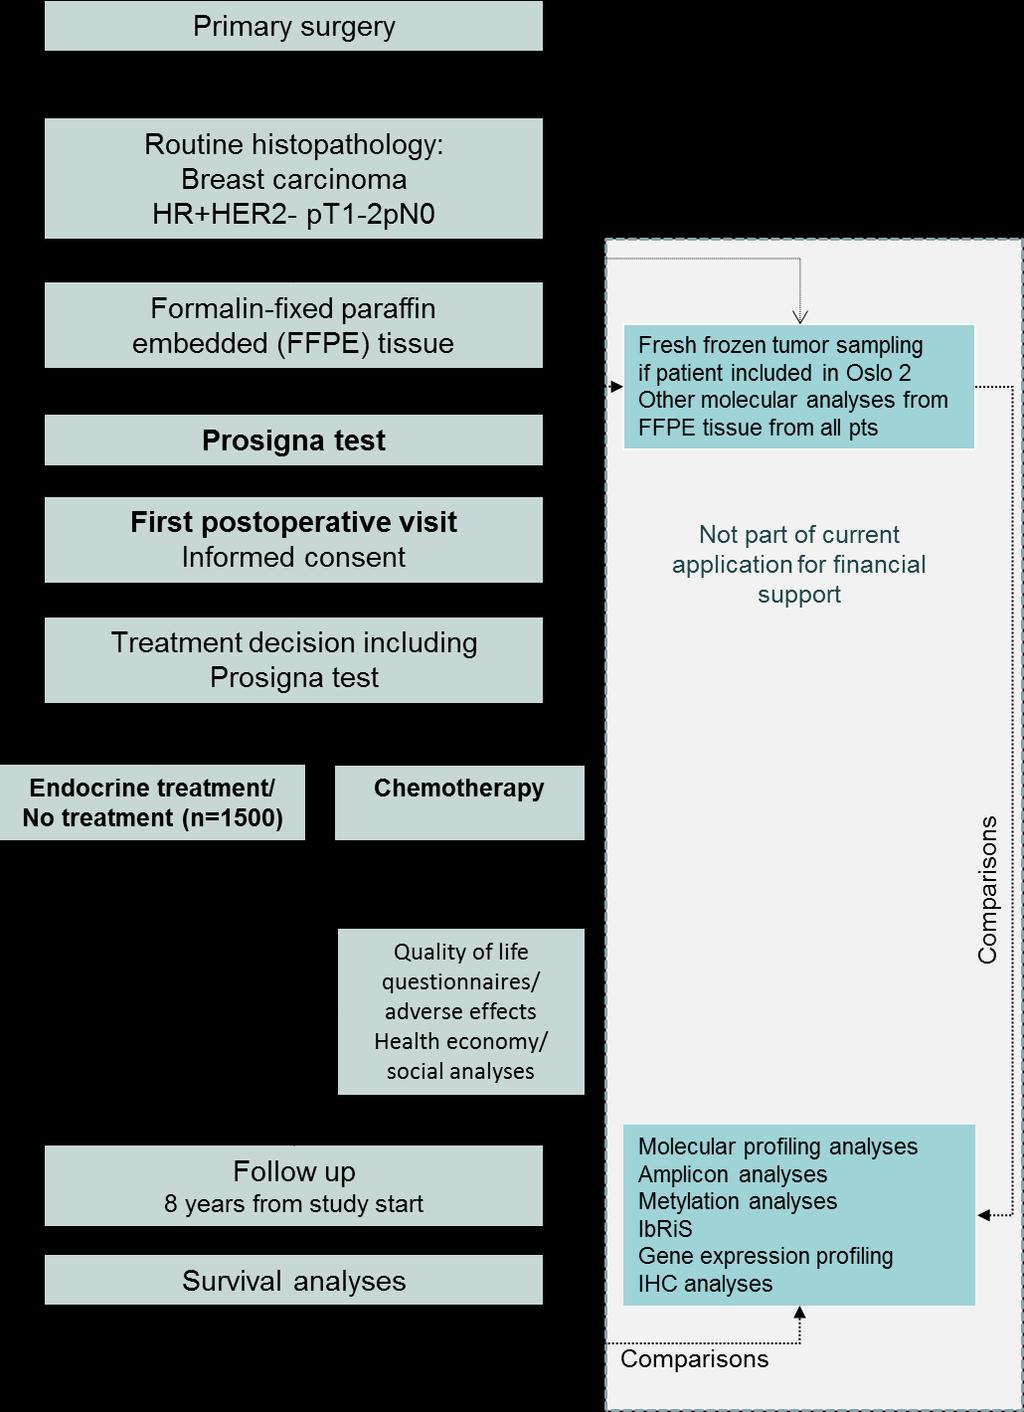 EMIT-1 Prospective study - Prosigna used for treatment decision in adjuvant situation among pt1-2 pn0 HR+/HER2- pts Inclusion of 2150 patients Expect 96% metastasis-free survival at 5 years follow up